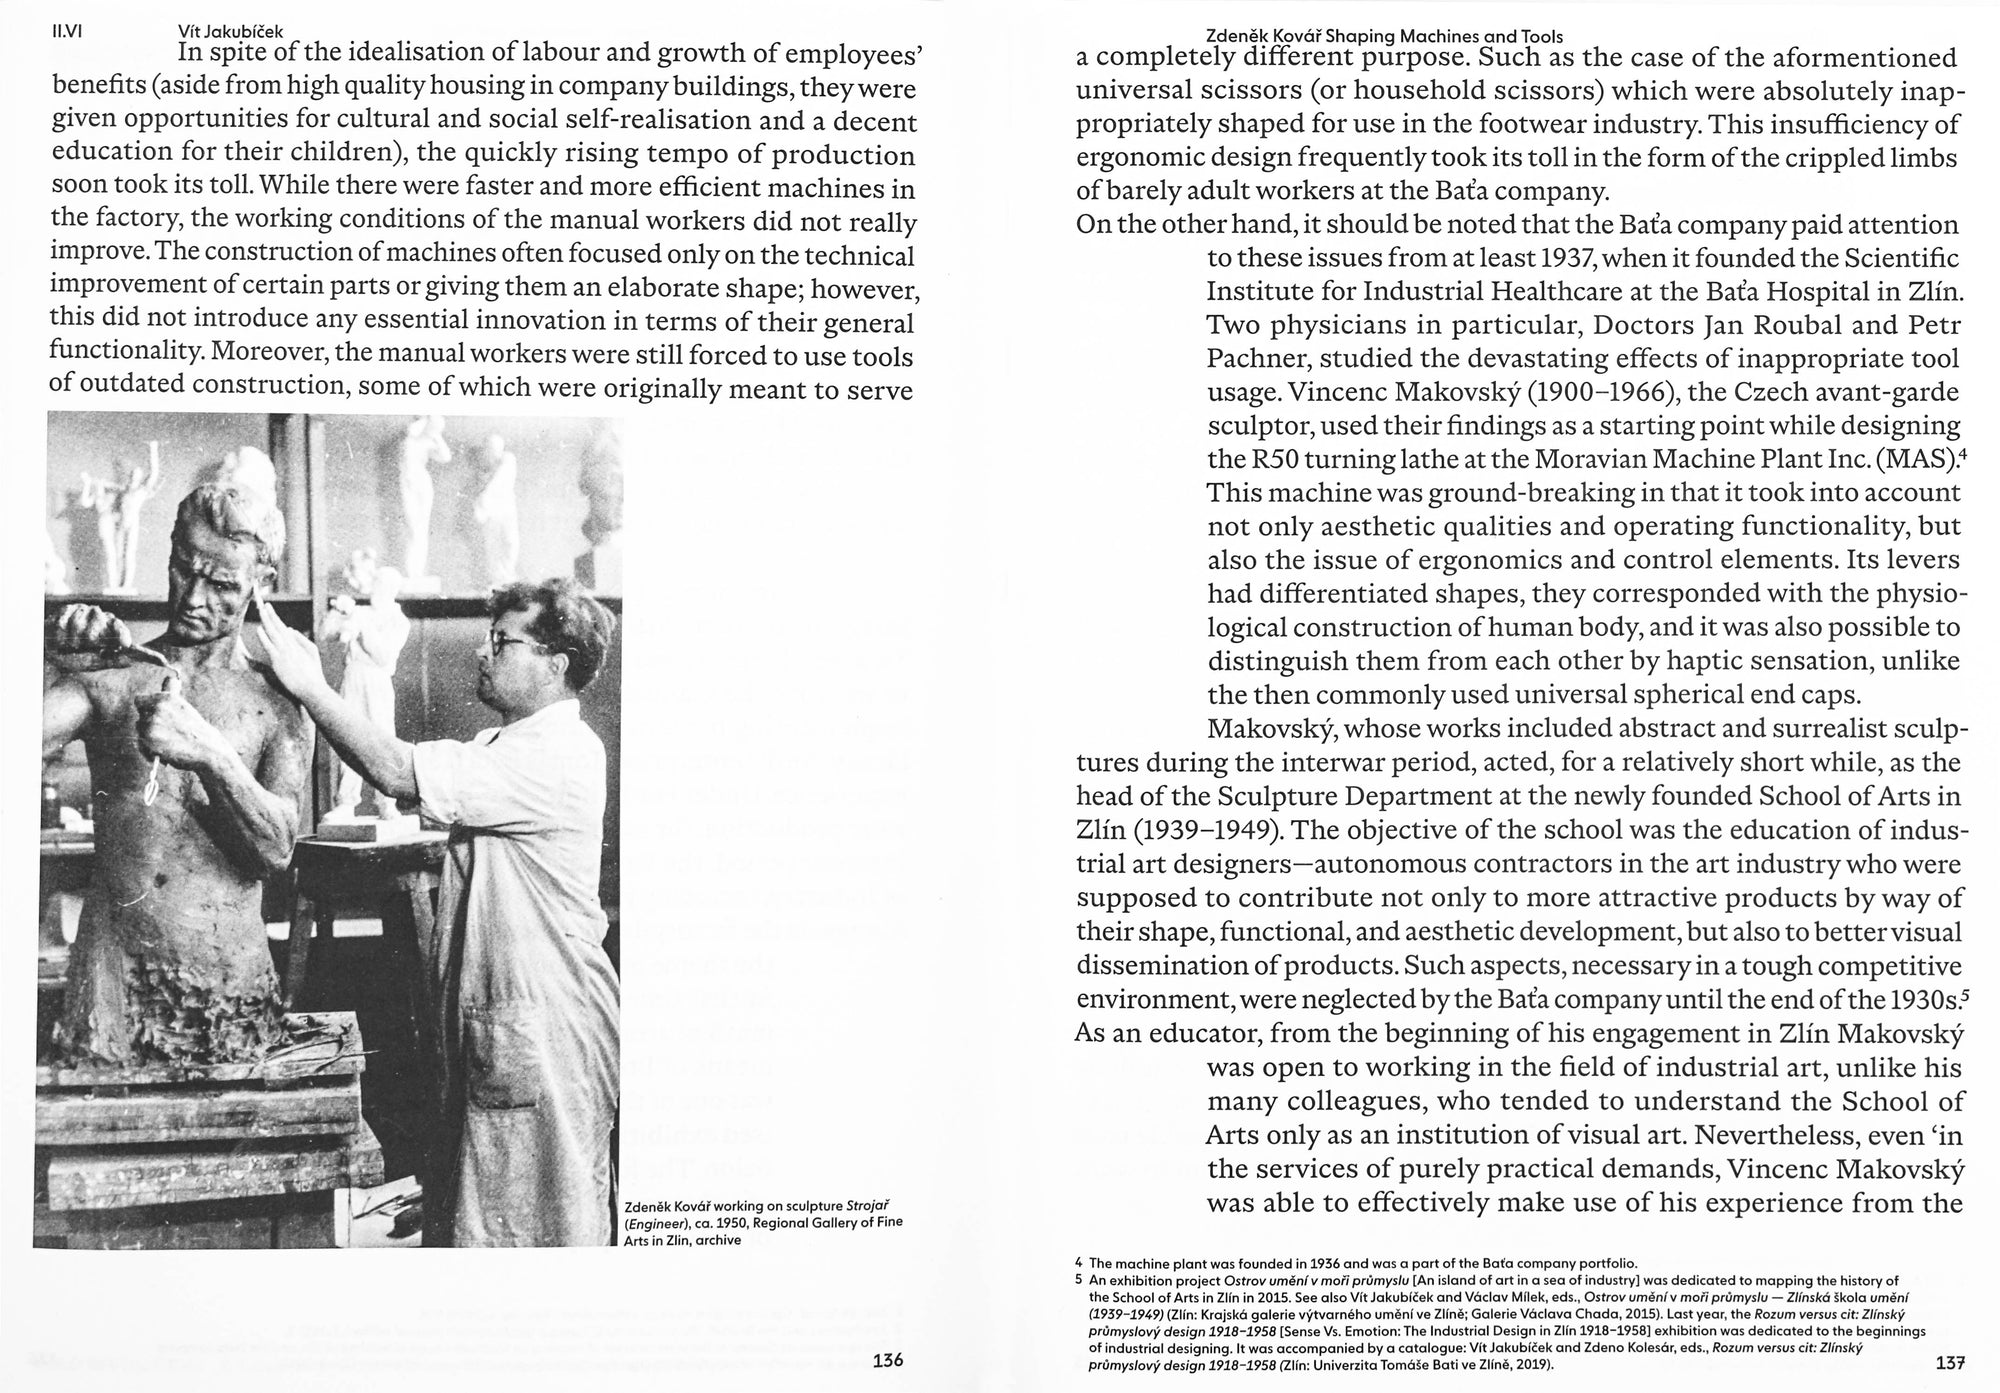 Book spread with two columns of text written in black sans serif. On the left side in the text is a black and white image of a sculptor chiseling on a male figure.